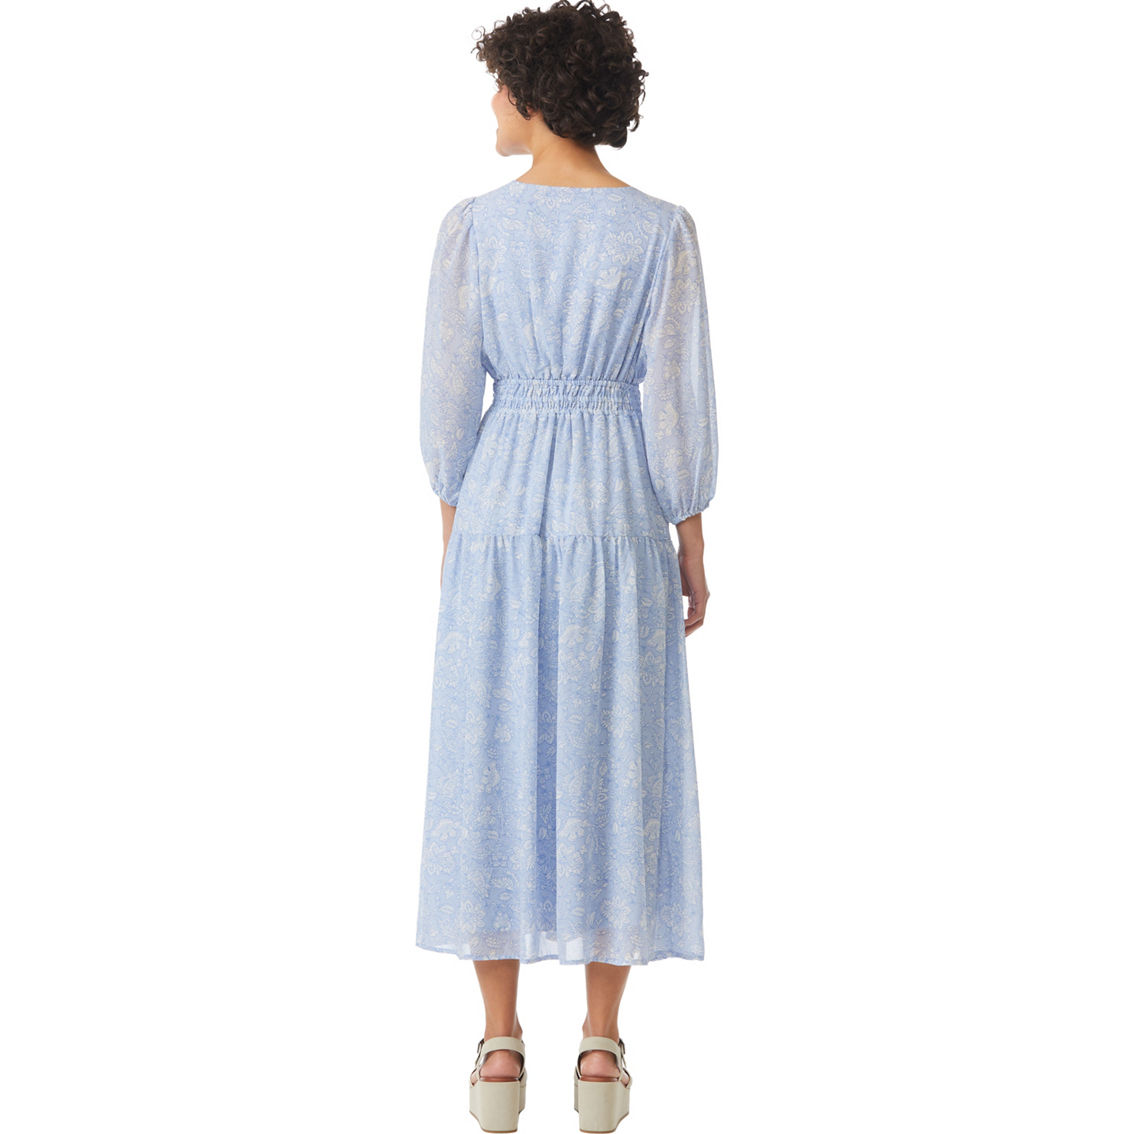 WallFlower Juniors Peasant Midi Dress in Blue with a White Boho Folk Floral - Image 2 of 3